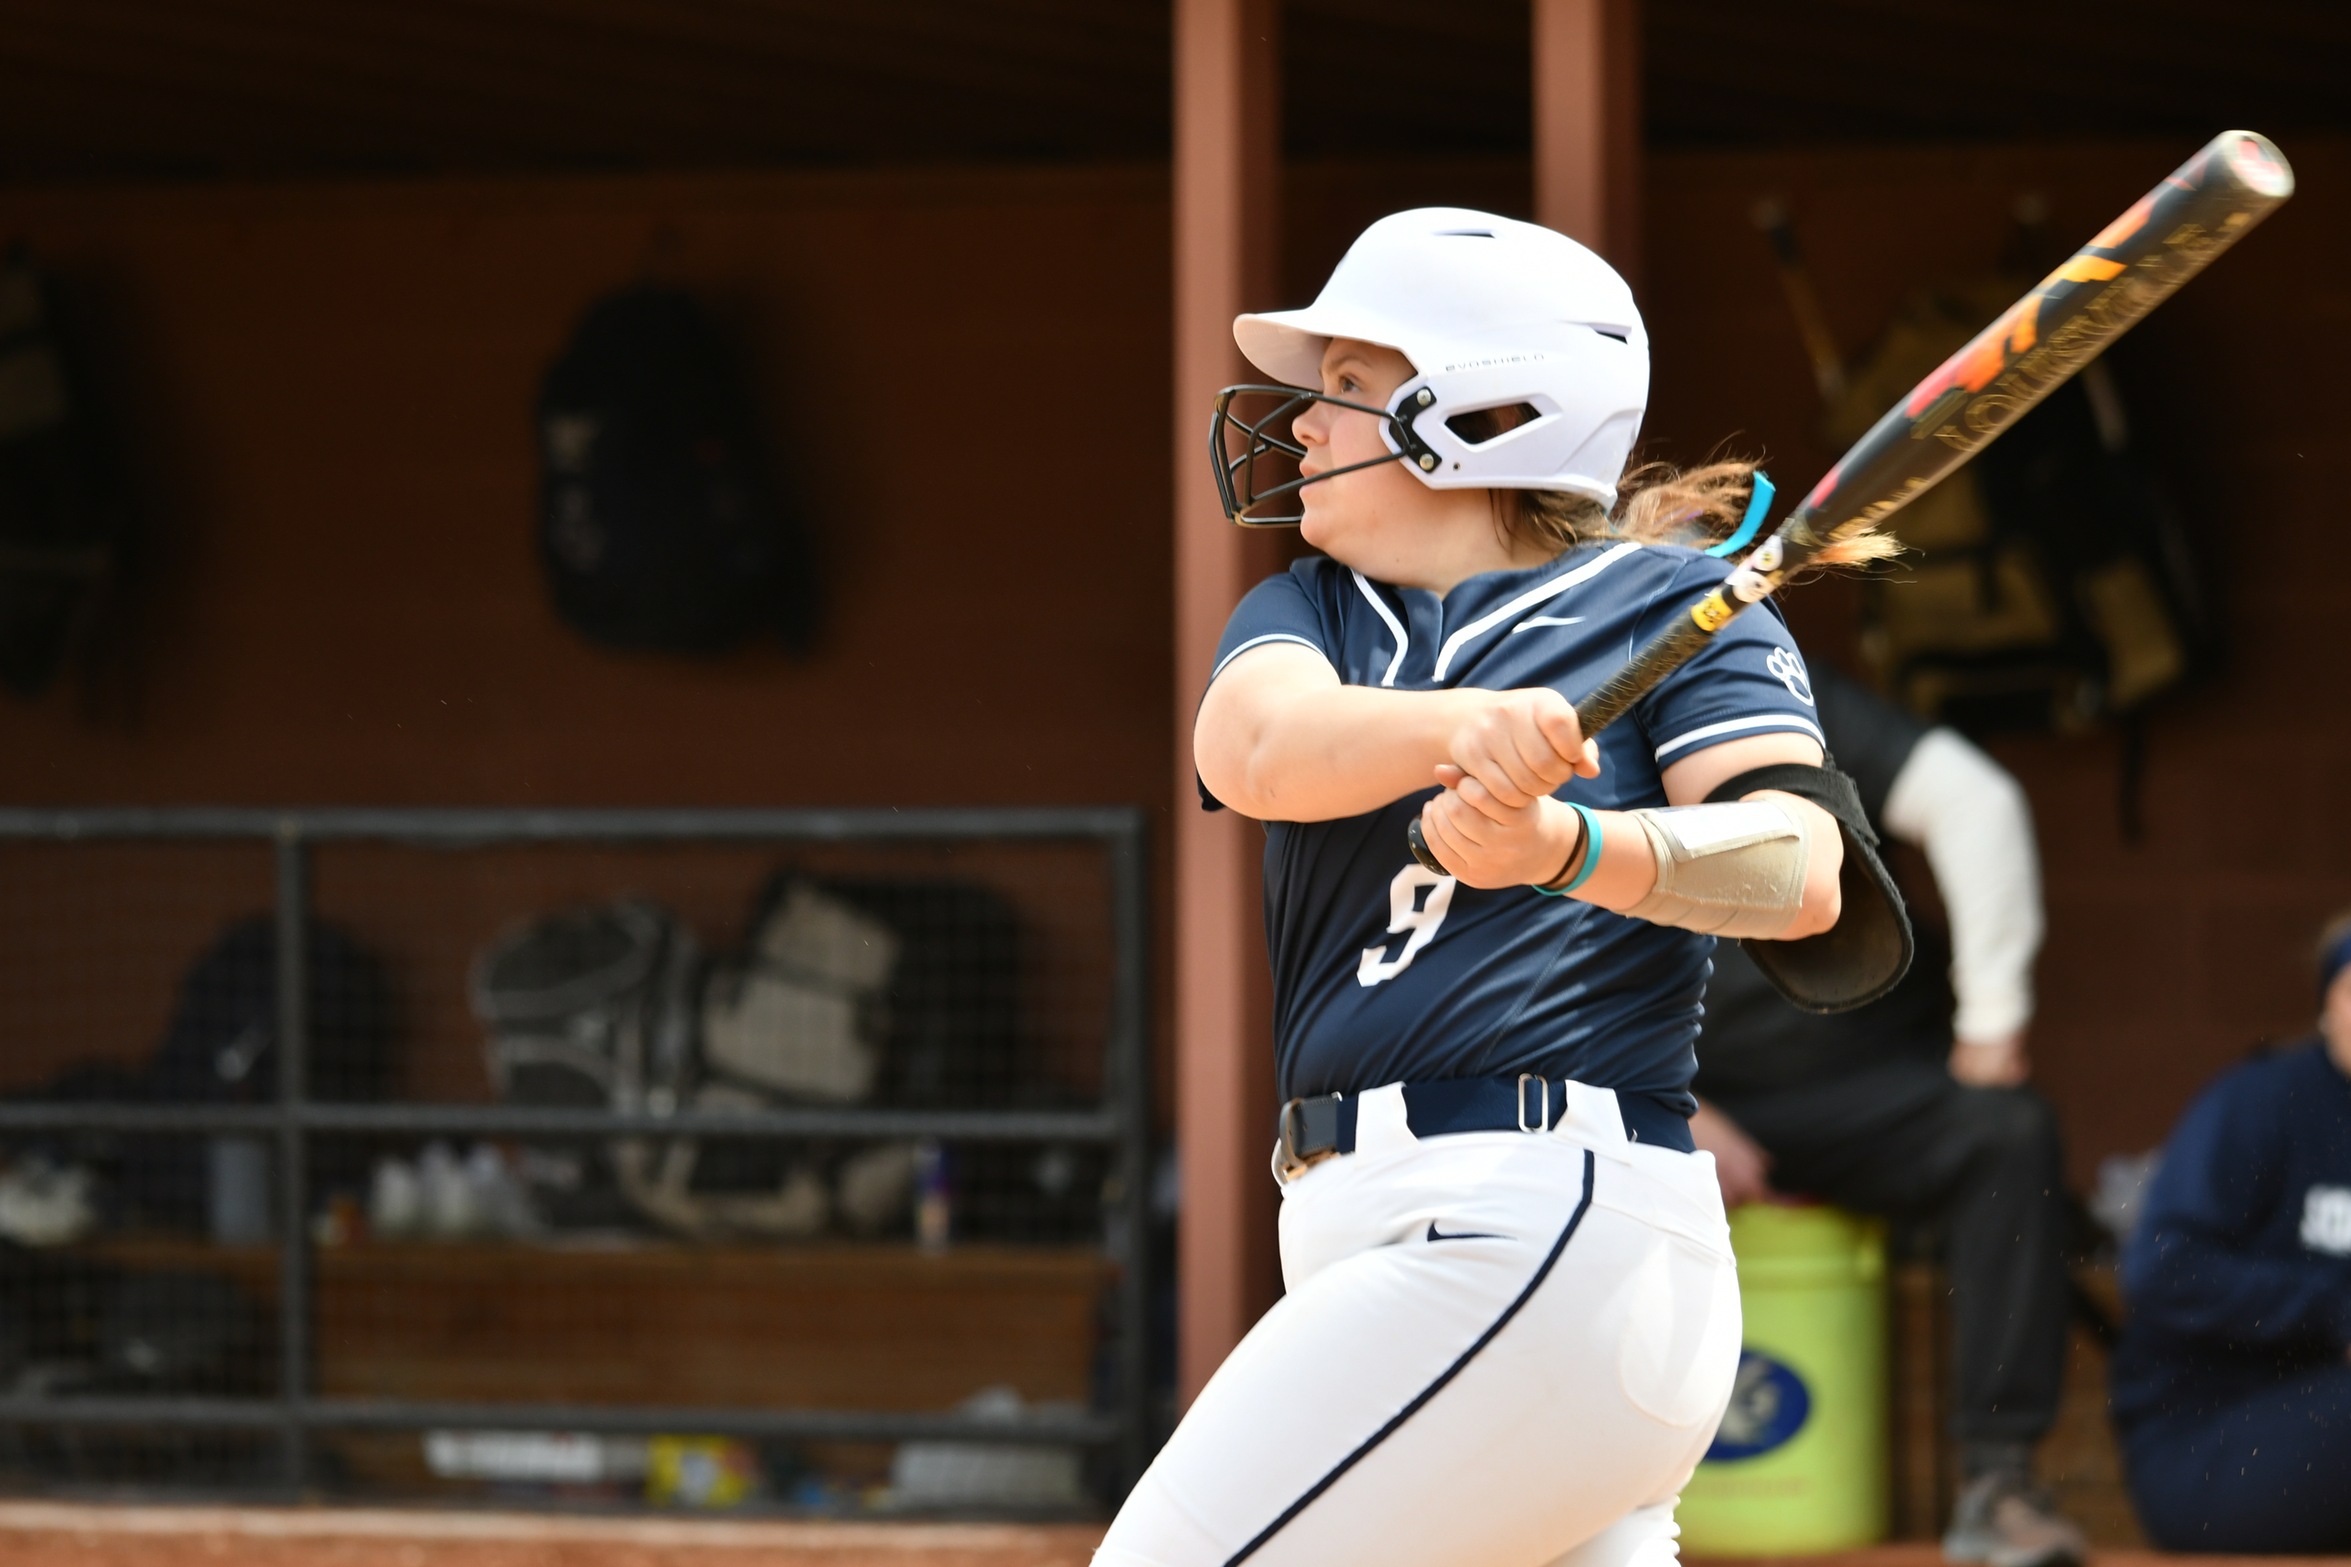 Behrend Softball Splits on Final Day of Spring Break; McNany Reaches 100 Hits